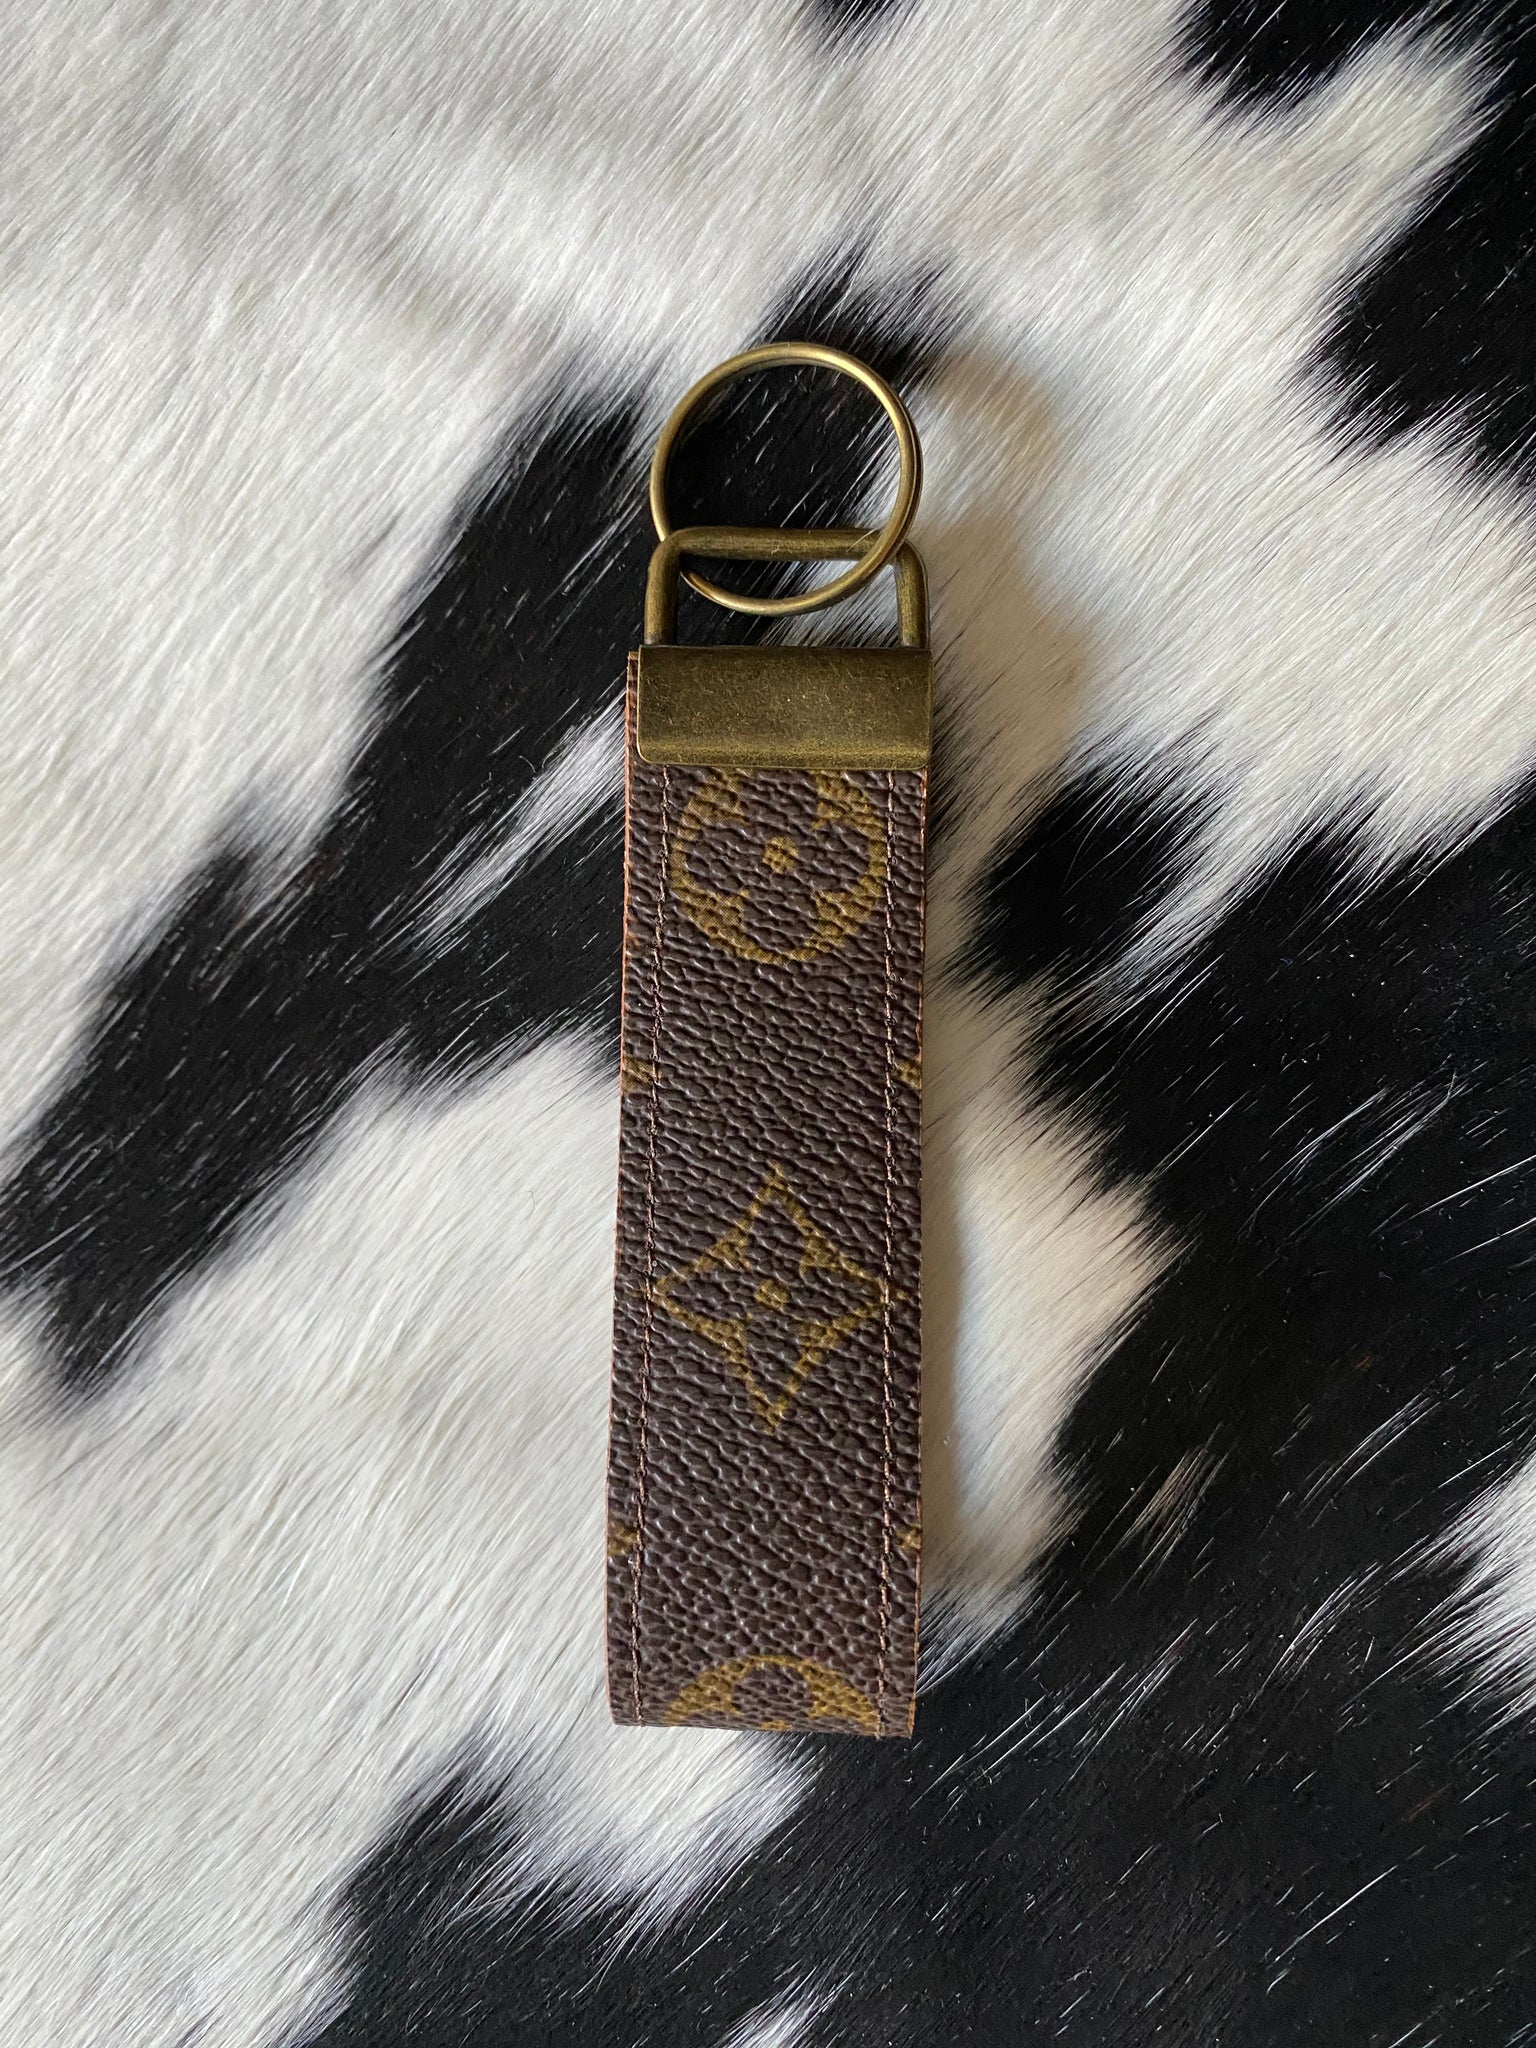 Authentic Upcycled Keyfob – RumHeart